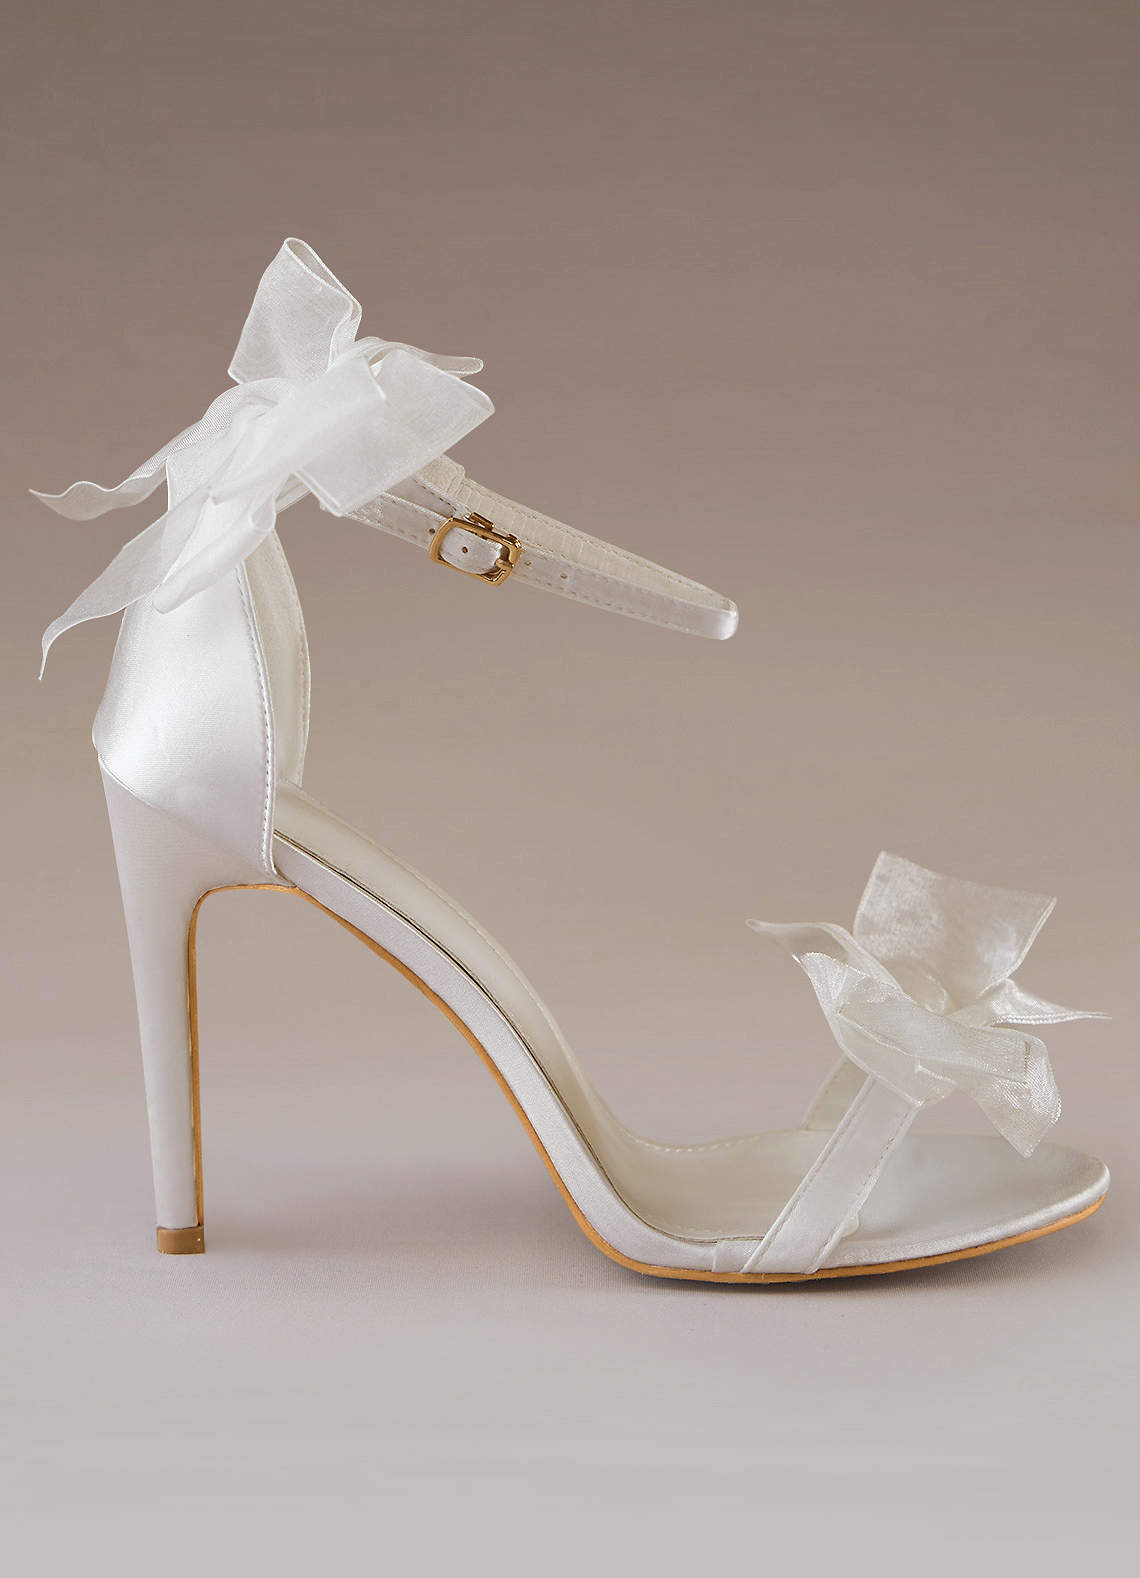 26 Wedding Shoes You Can Buy Online